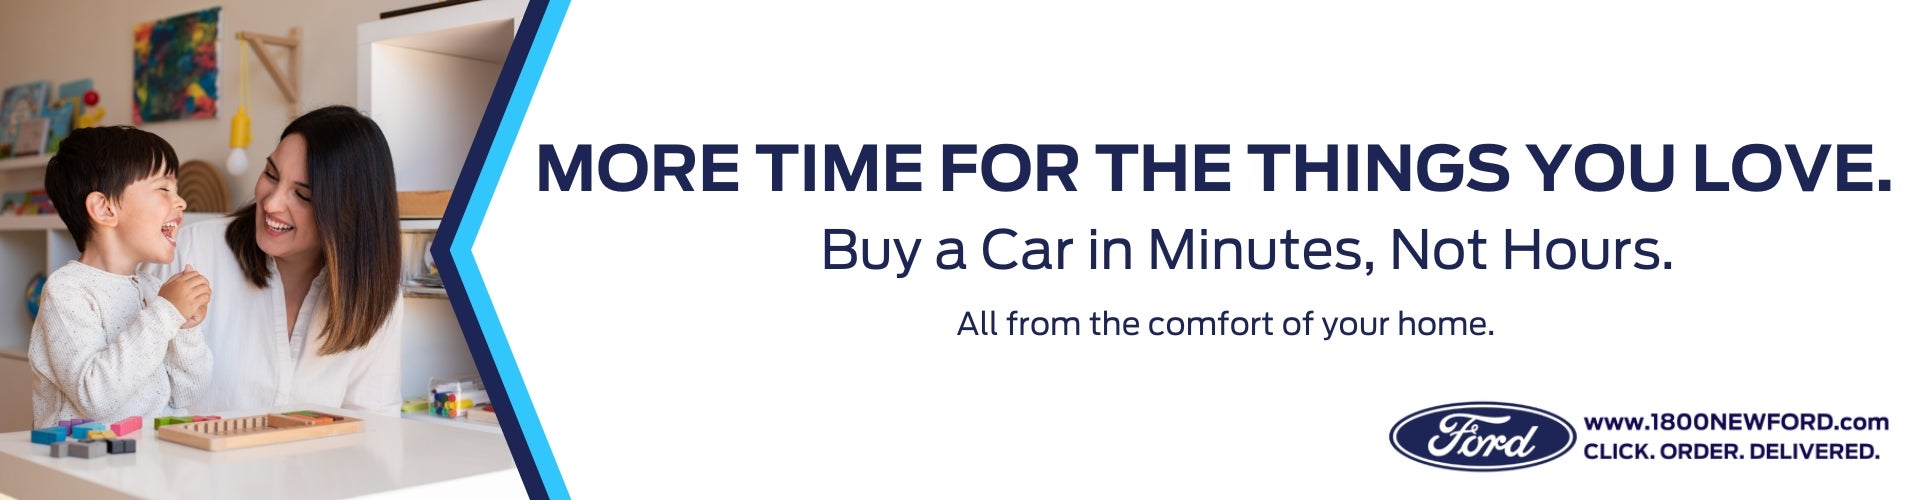 More time for the things you love buy a car in minutes